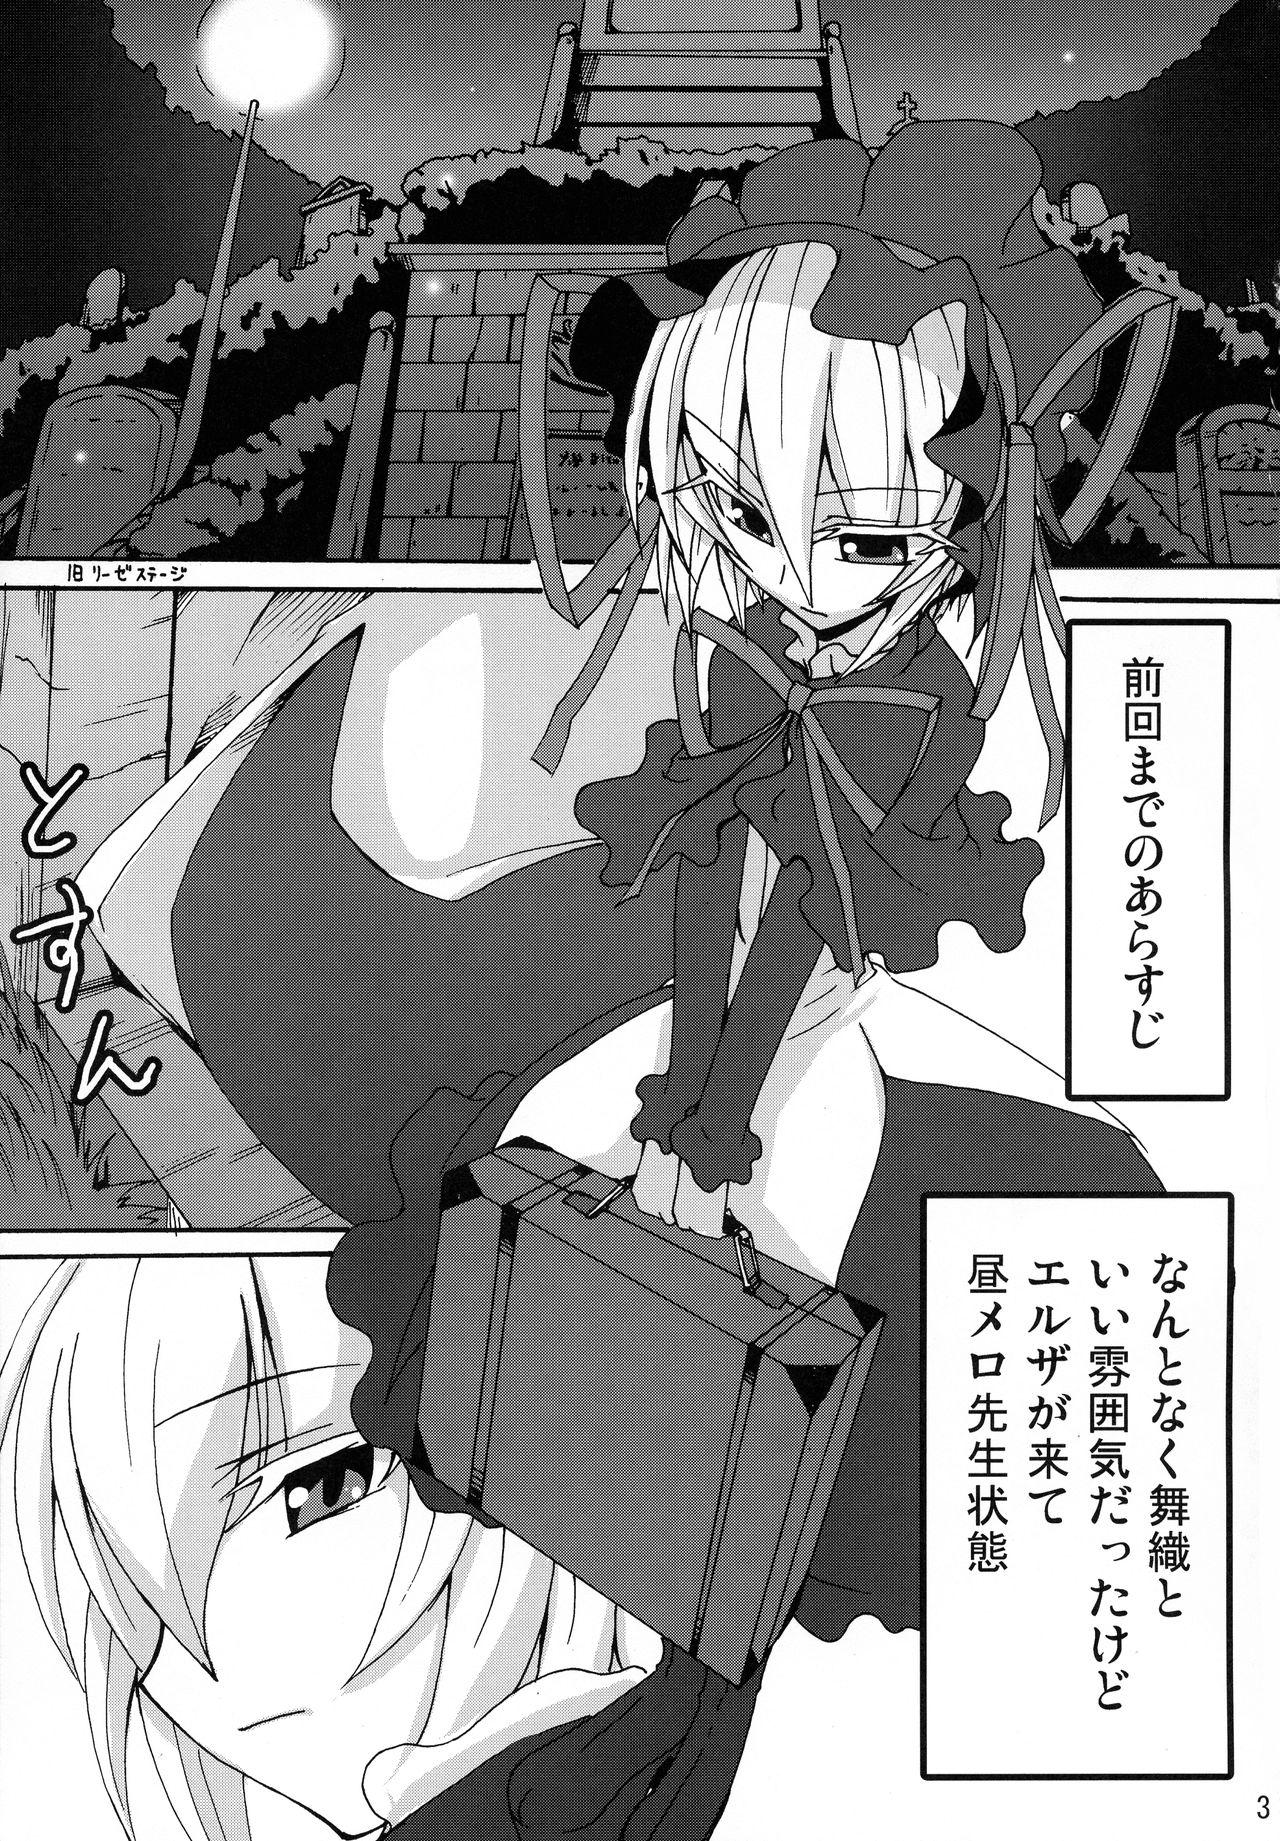 Chat Maorize Hon 3 - Arcana heart Petite Girl Porn - Page 3